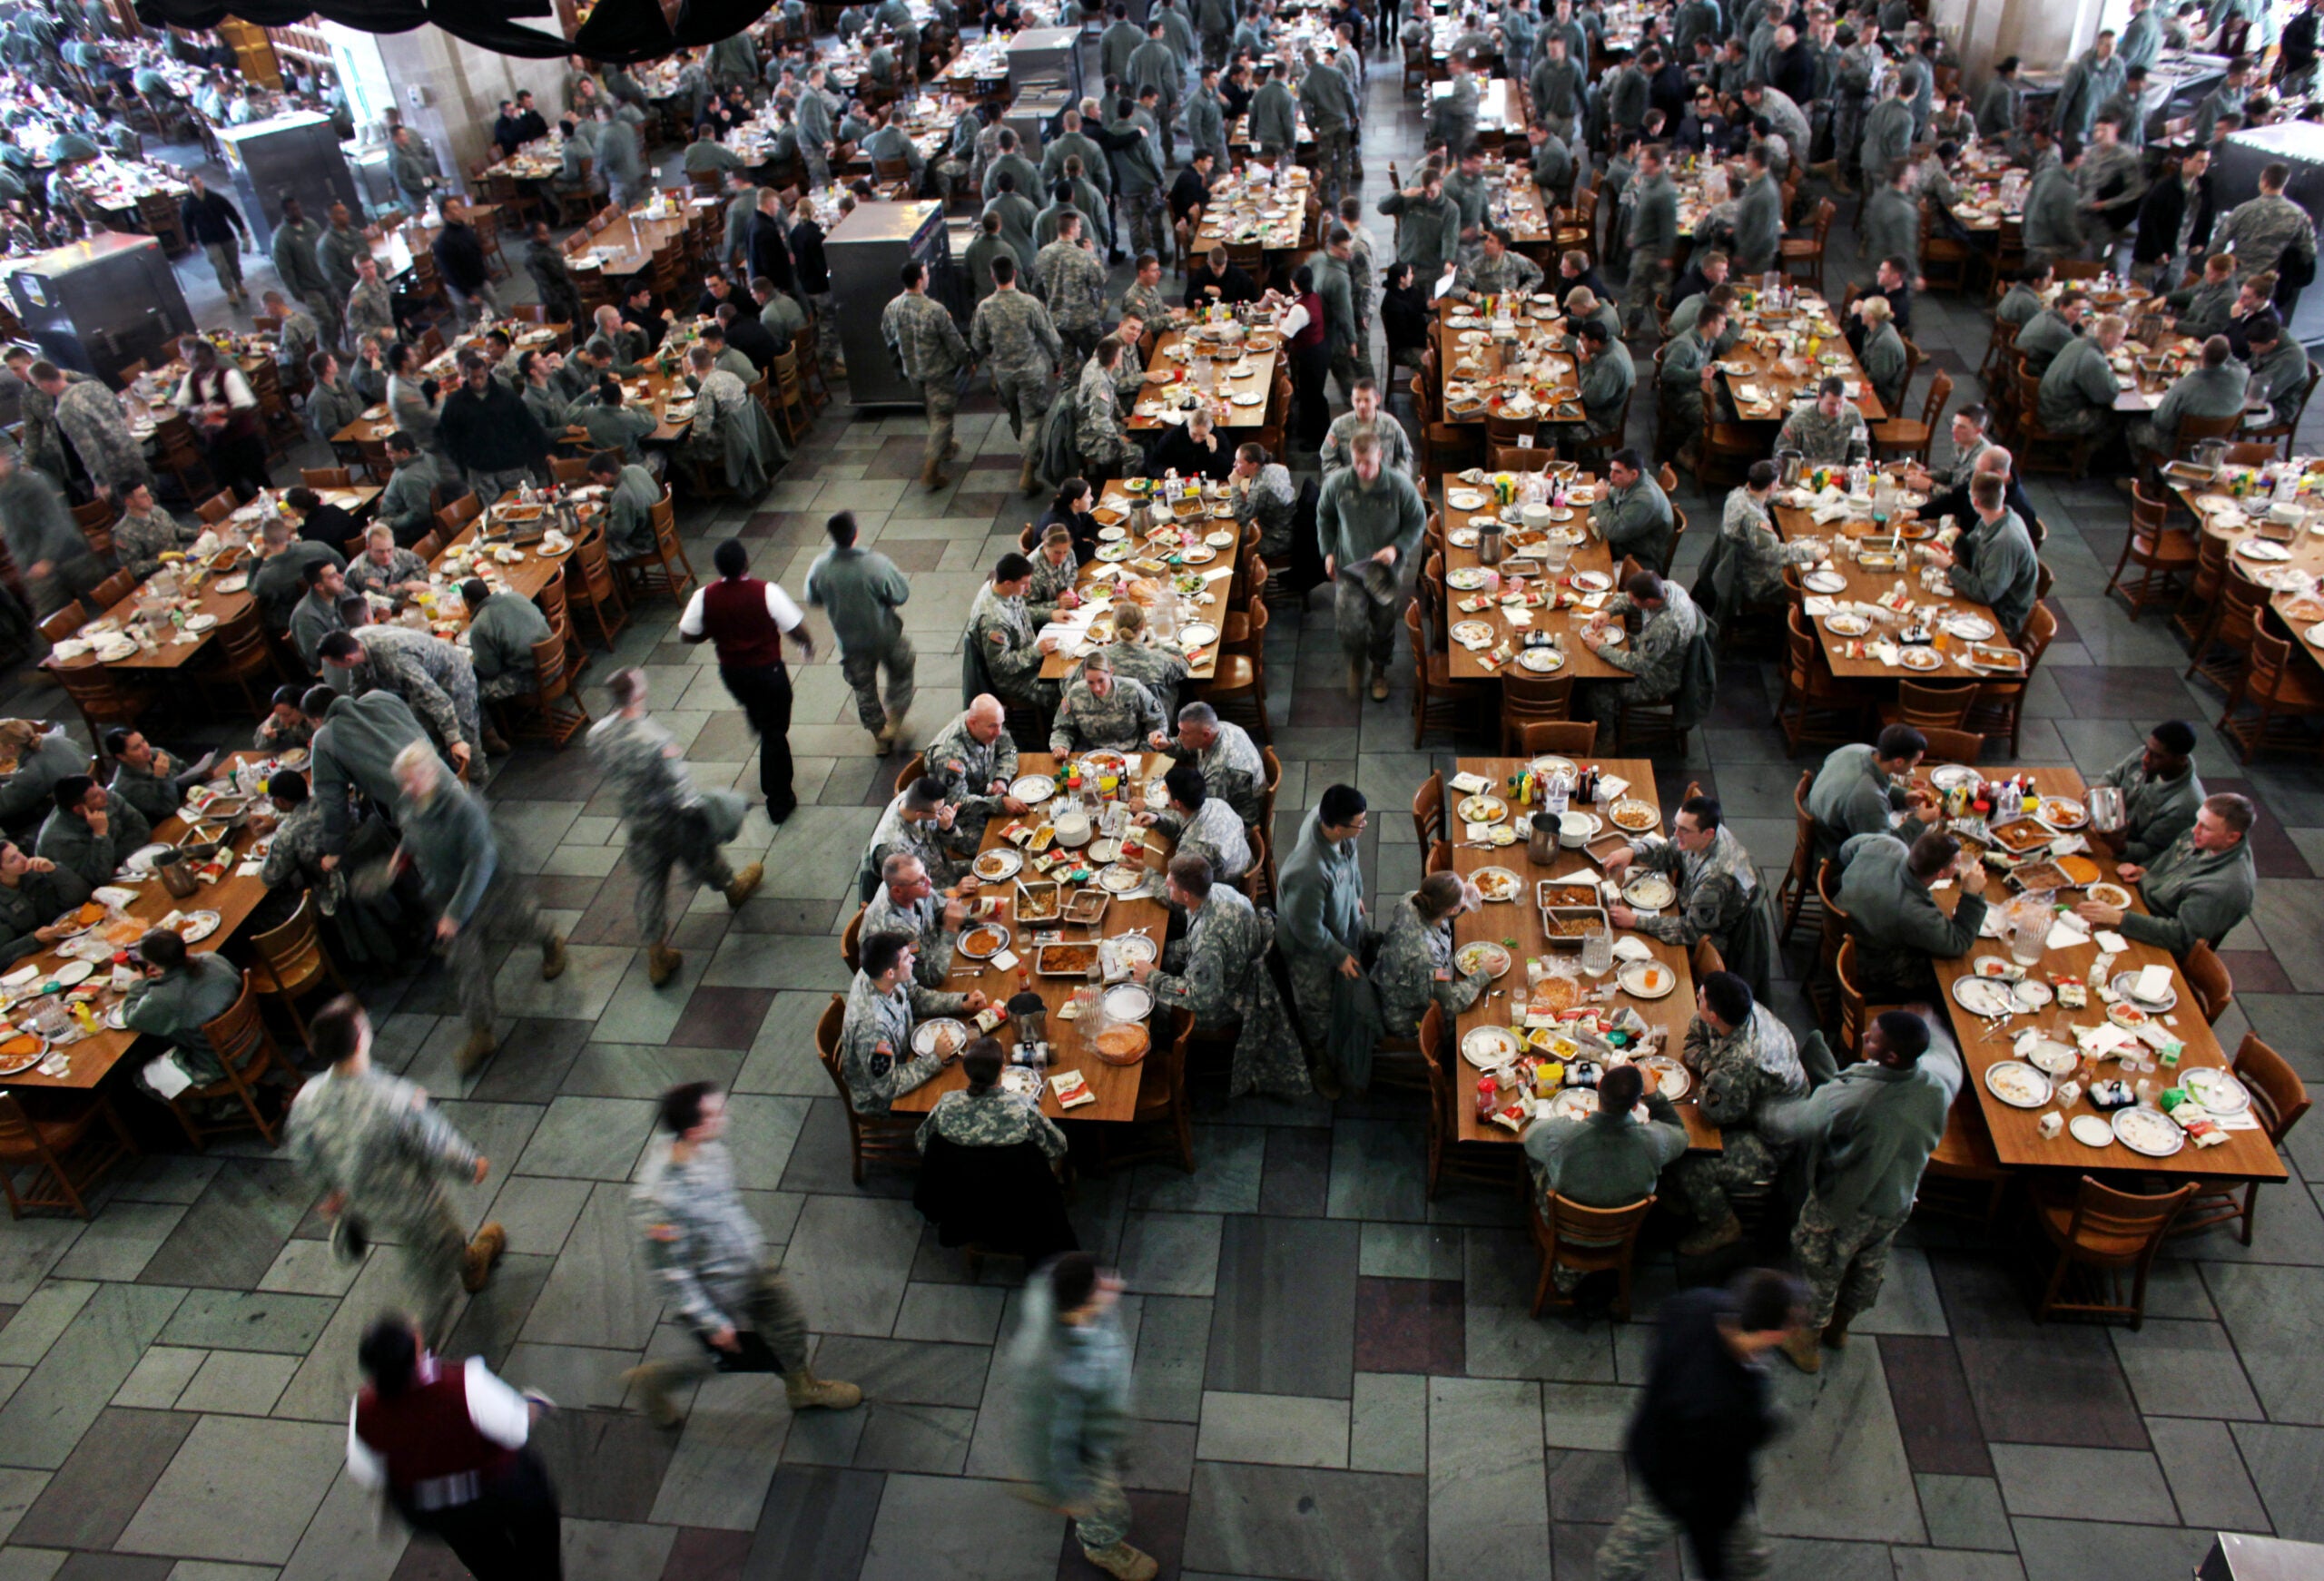 WEST POINT, NY - NOVEMBER 21: Cadets dine inside the mess hall of the United States Military Academy in West Point, NY, on November 21, 2013. (Photo by Yana Paskova/For The Washington Post via Getty Images)